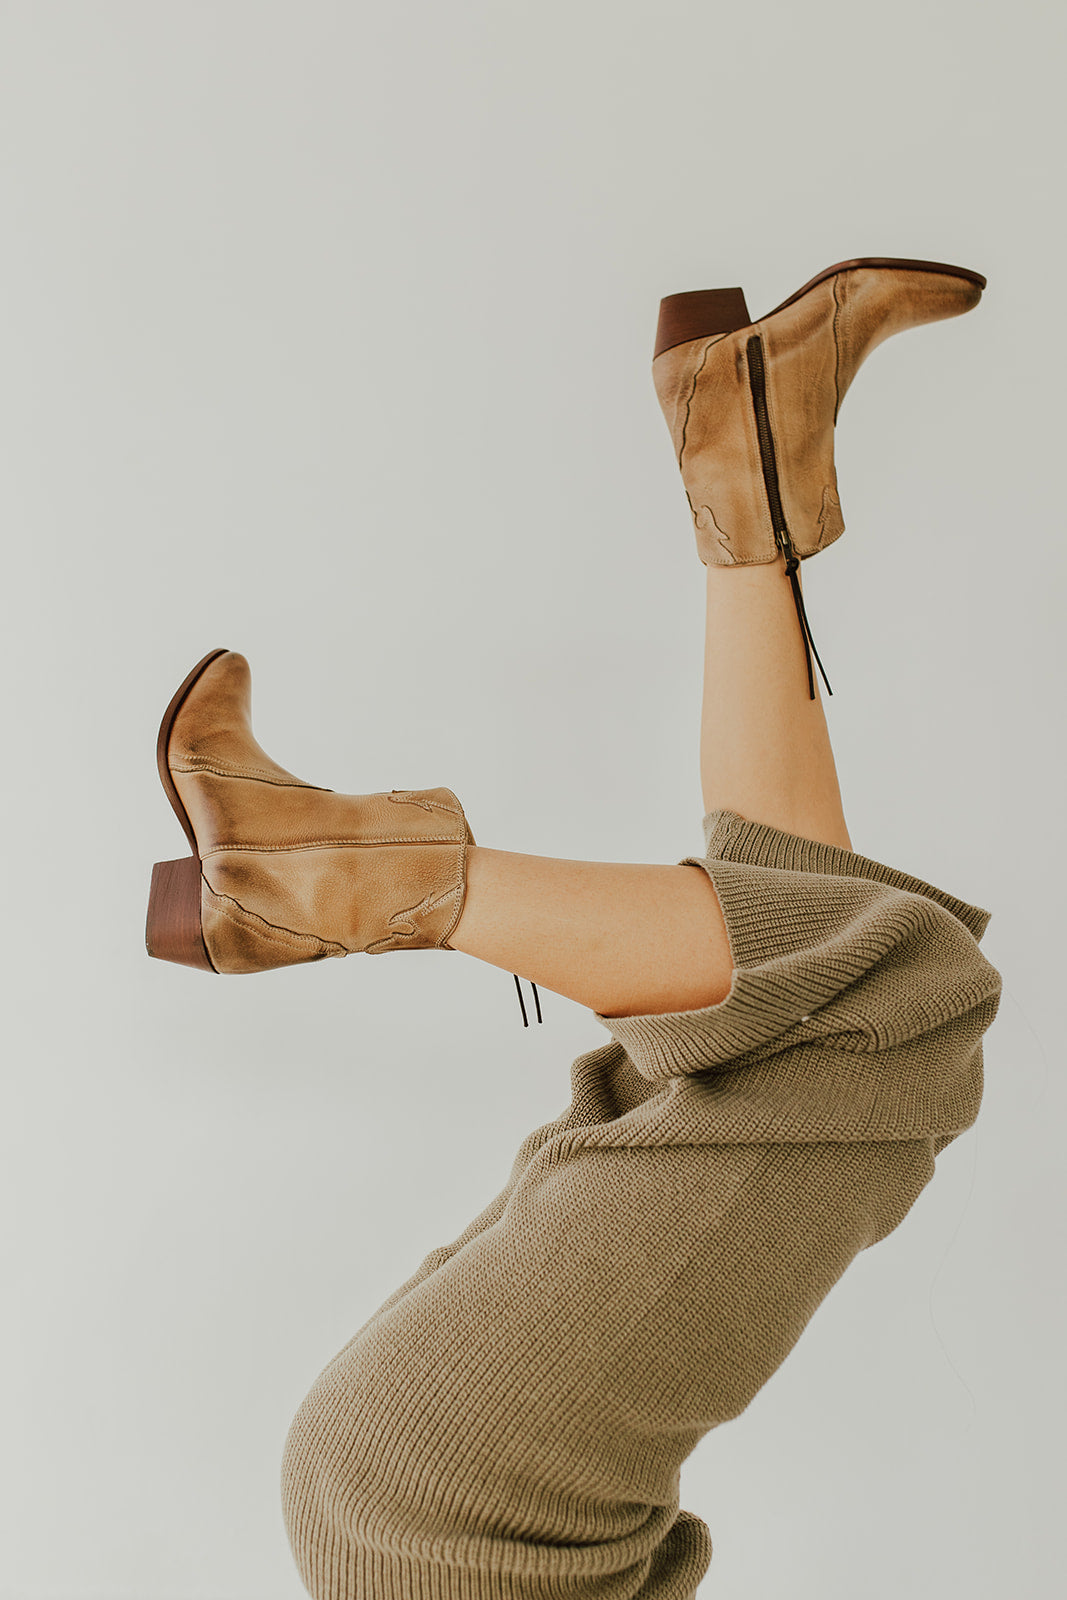 THE FREE PEOPLE NEW FRONTIER WESTERN BOOT IN DISTRESSED TAN